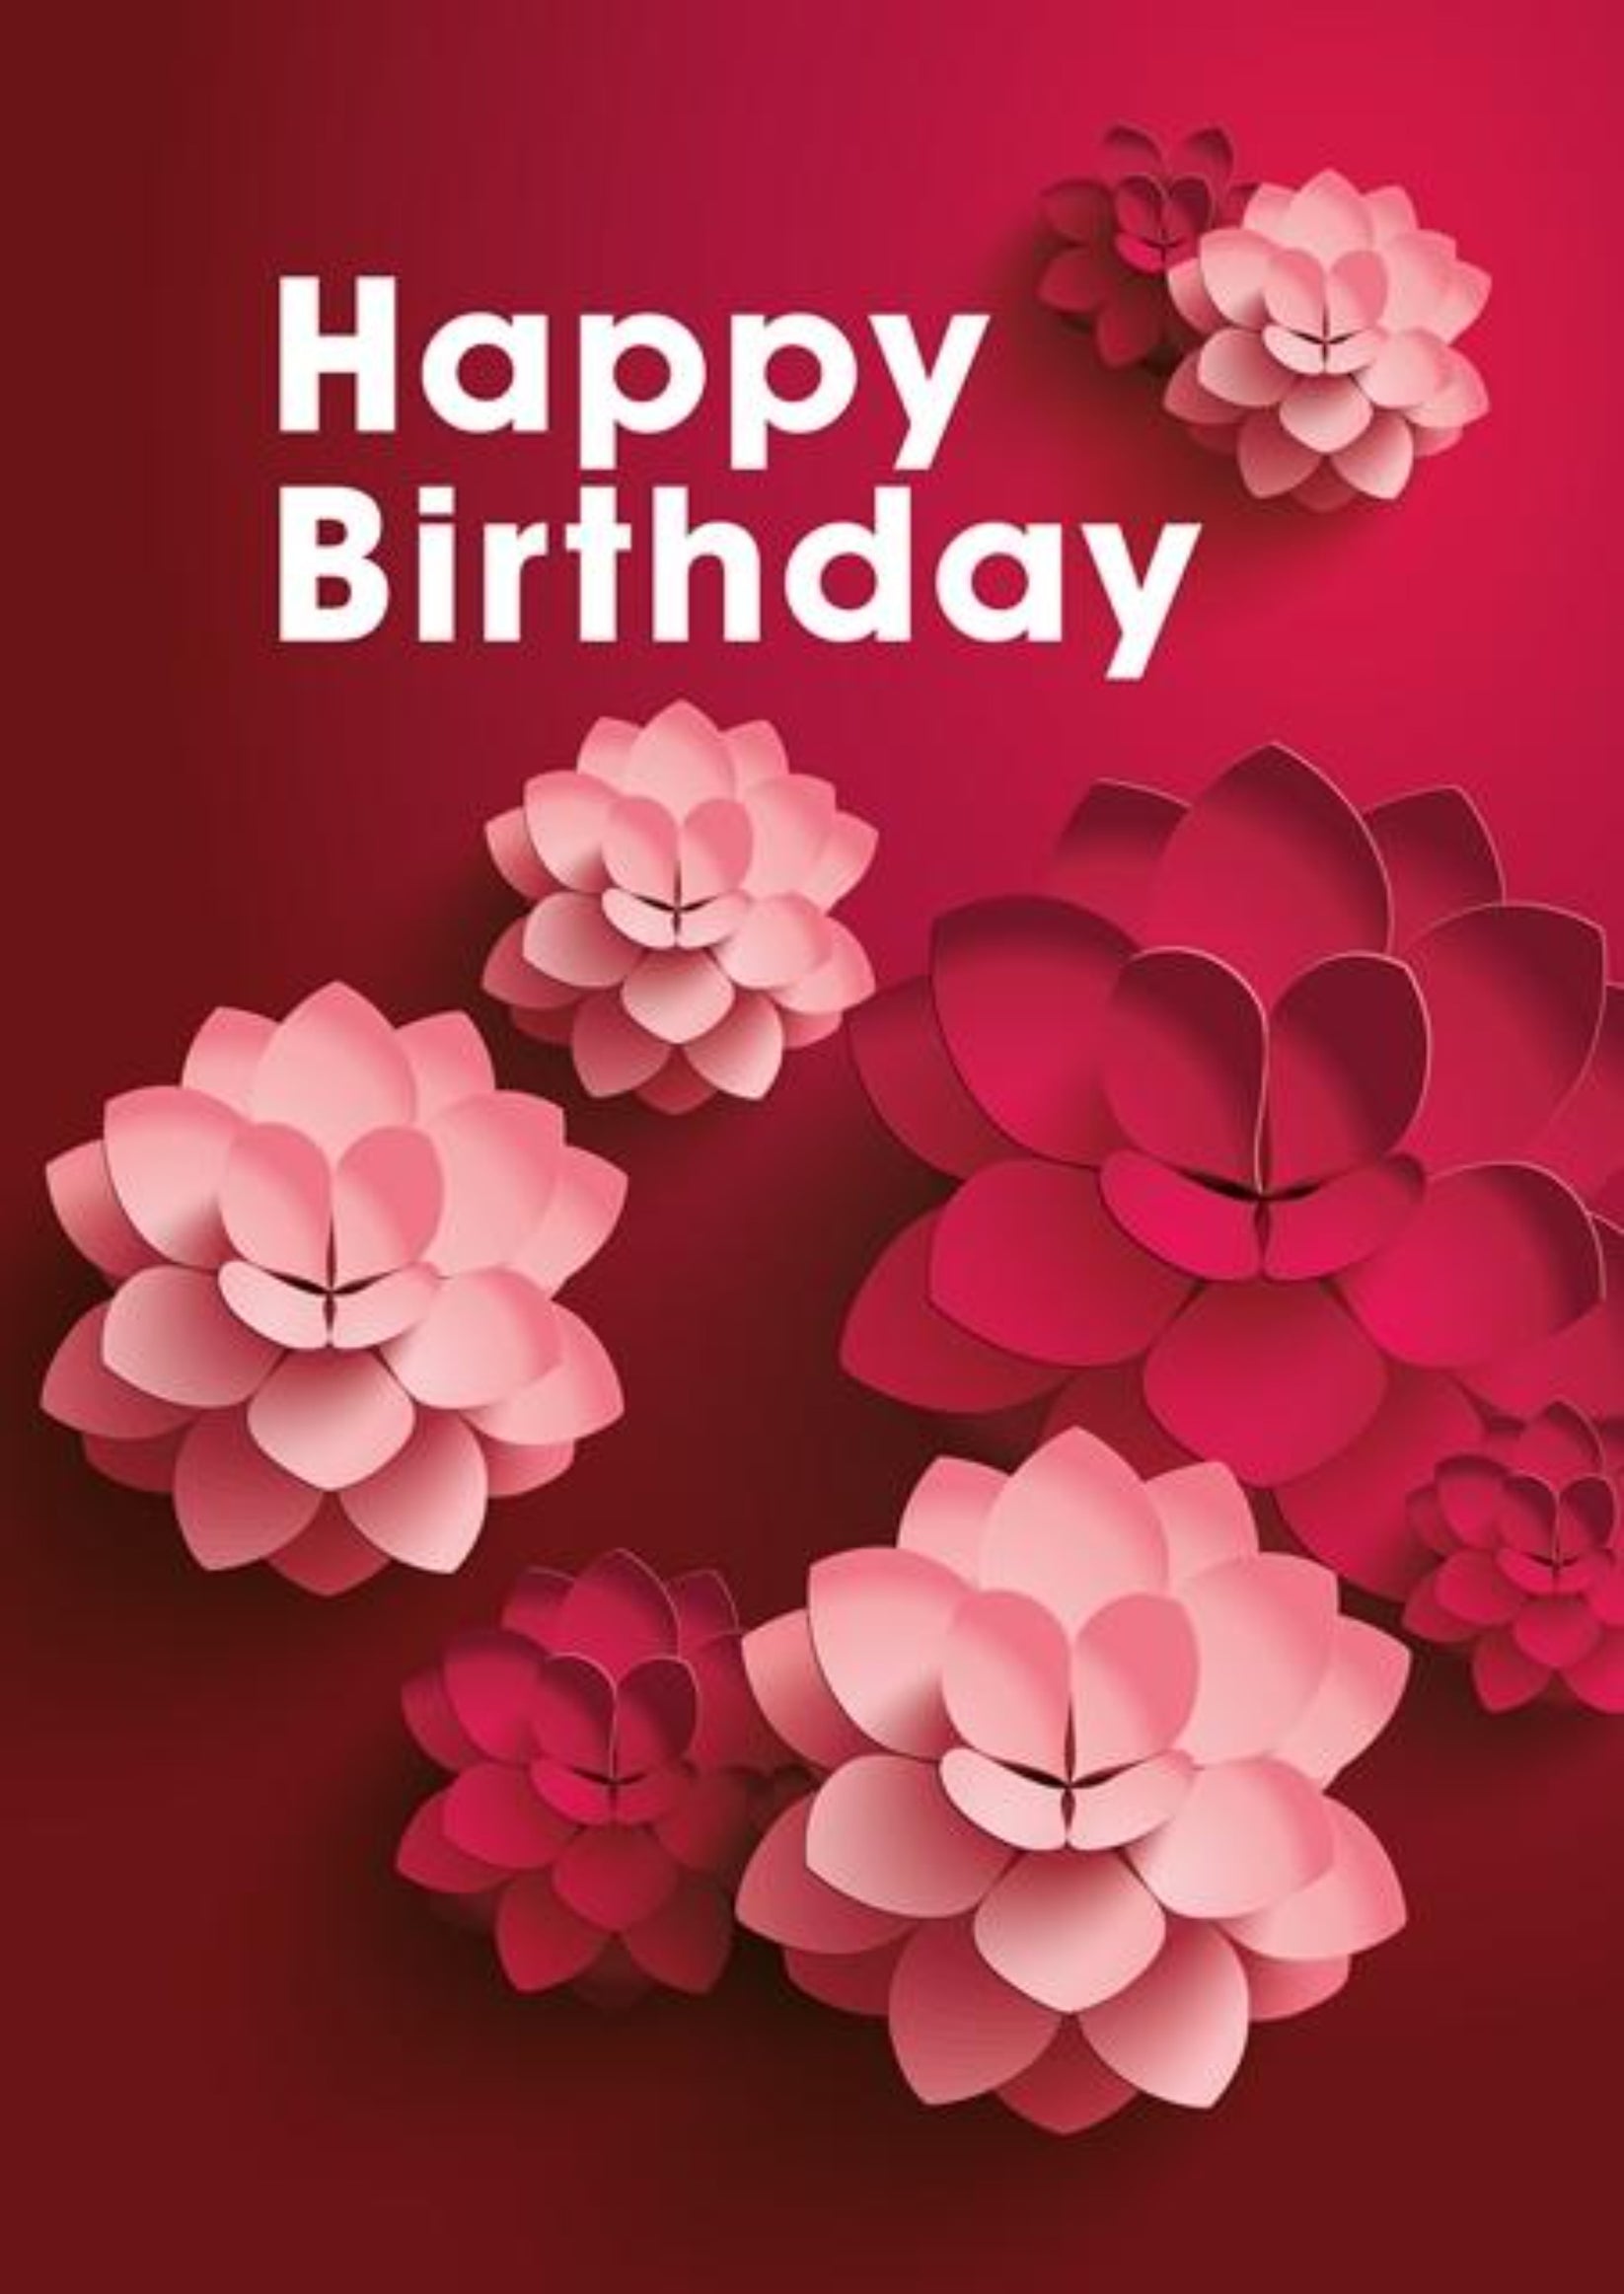 Floral Birthday Greeting Card For Everyone – CardCraft